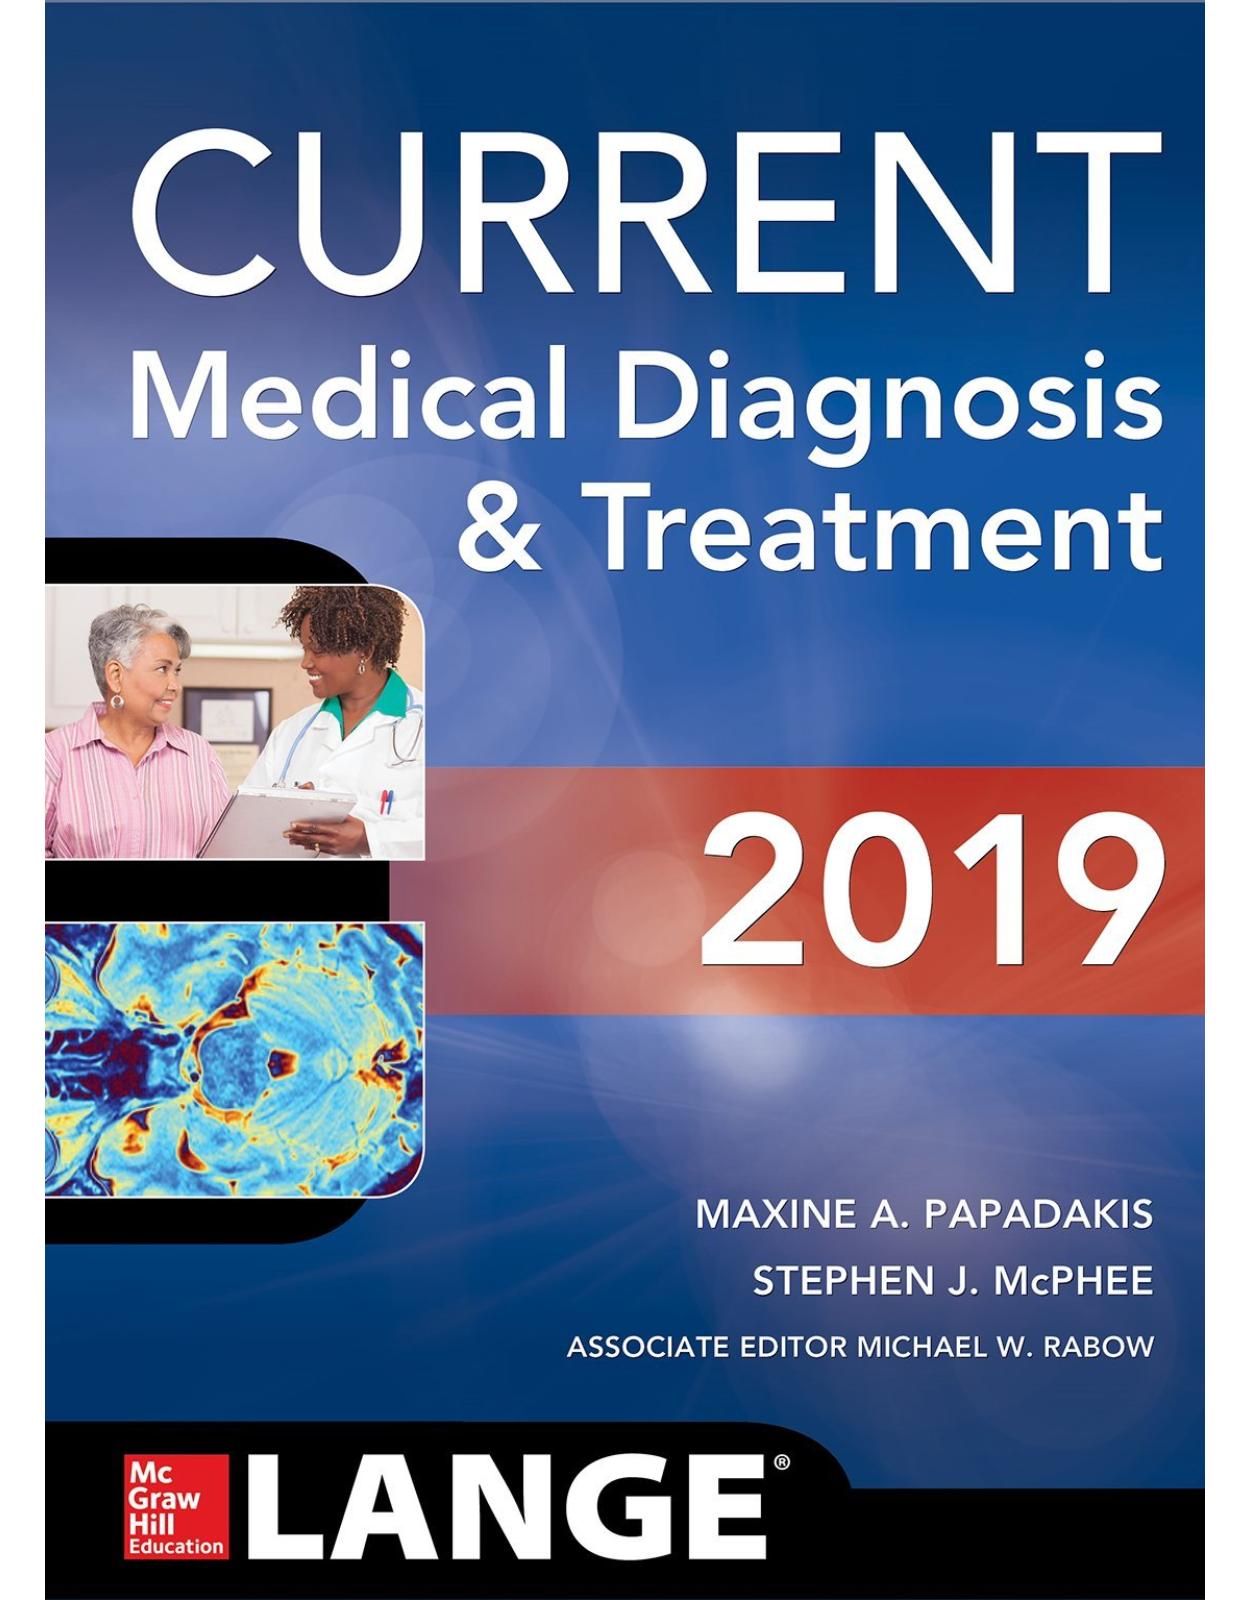 CURRENT Medical Diagnosis and Treatment 2019